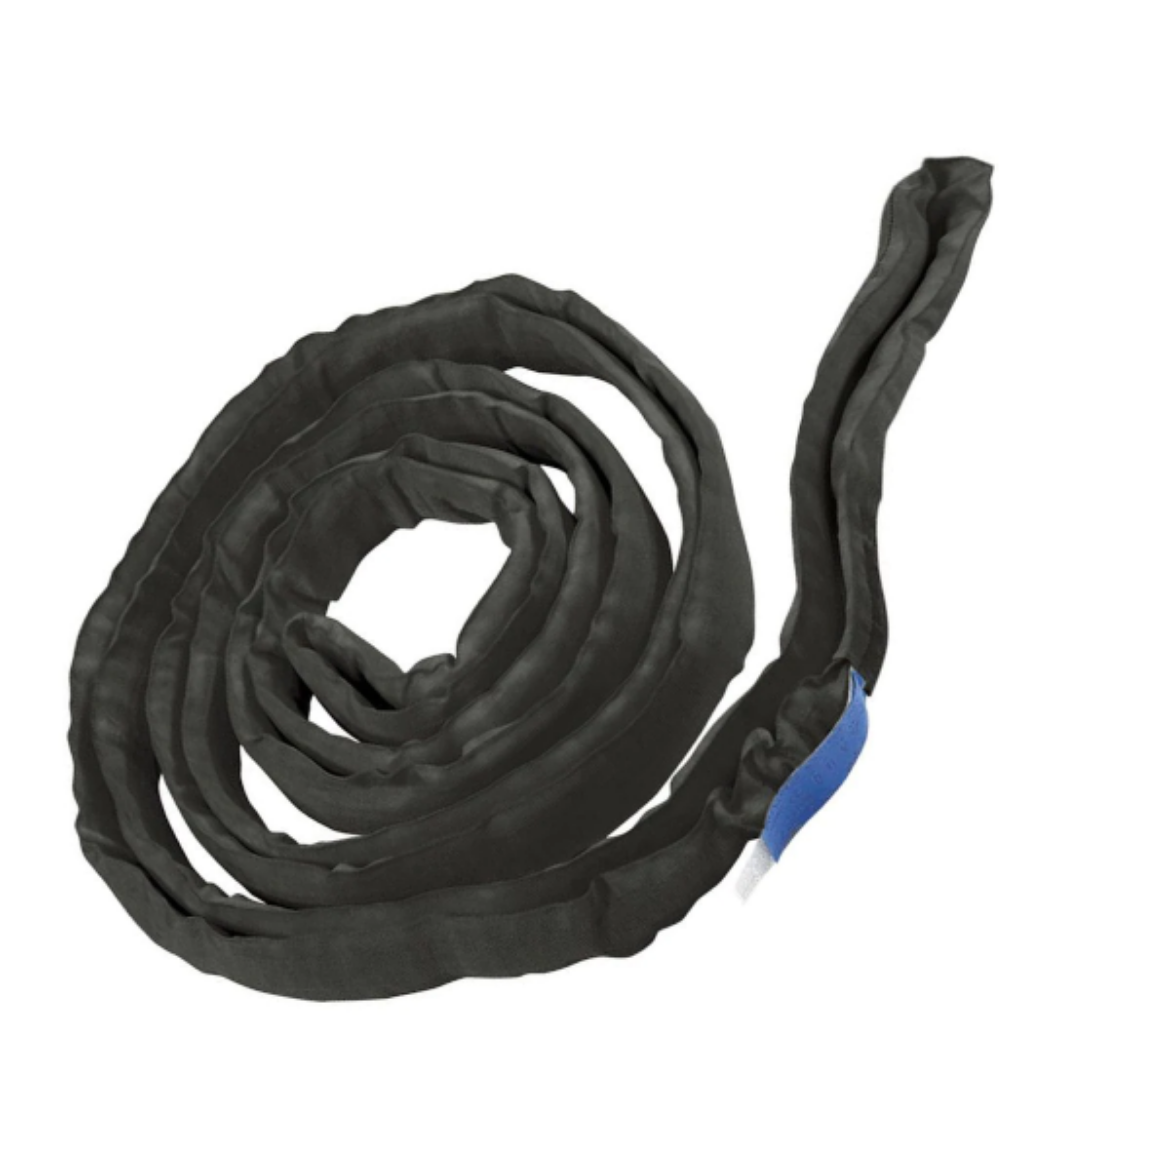 Picture of BLACKSNAKE ATTACHMENT SLING X 1.5M. MSB 7,000KG